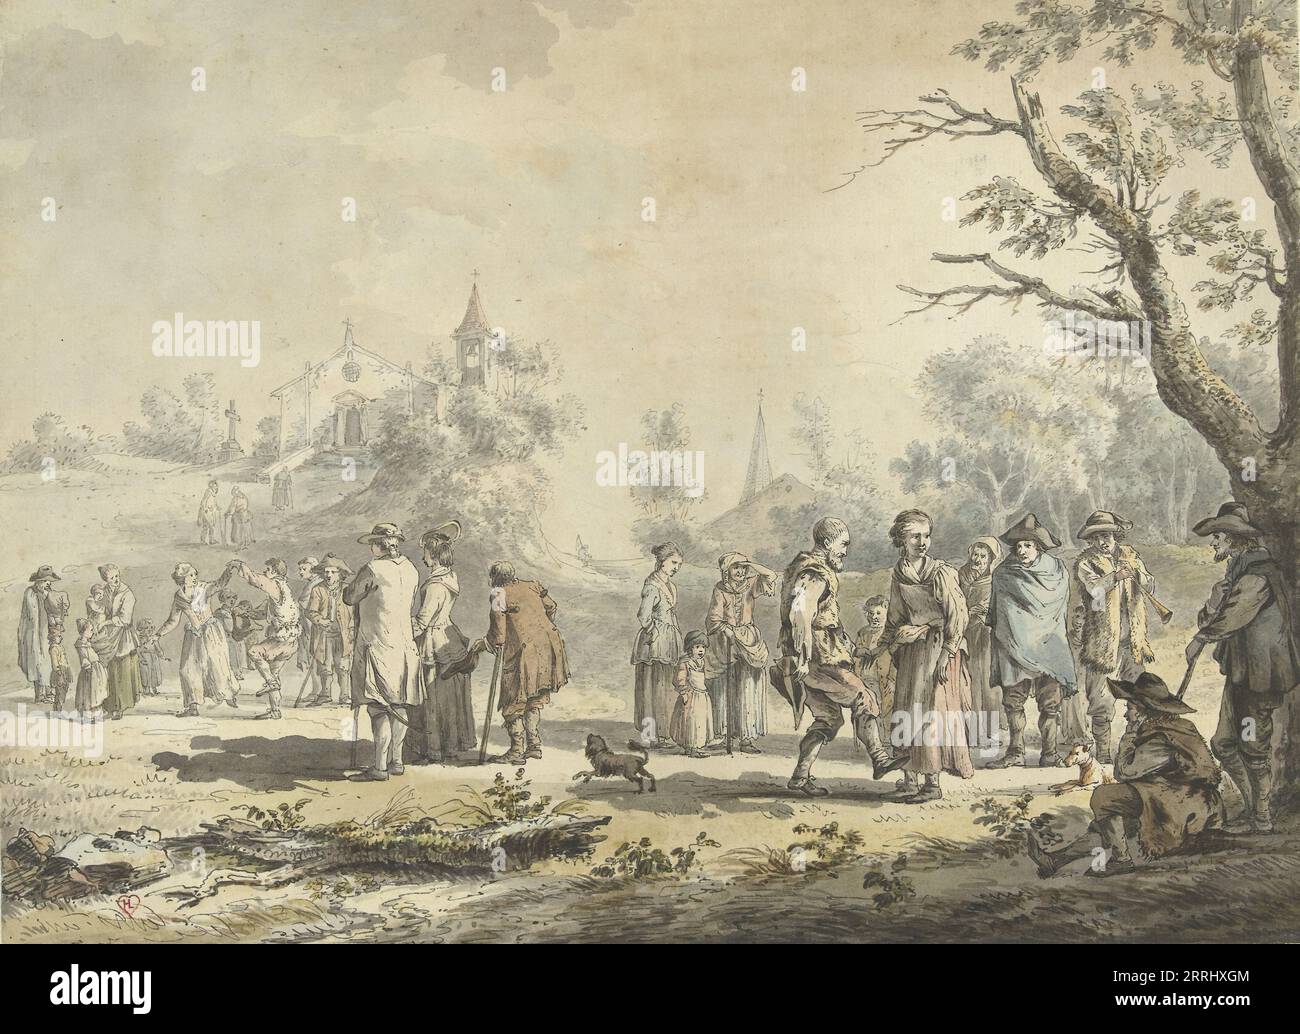 Dancing countrymen and spectators at a village, 1746-1810. Possibly a sketch for a print. Stock Photo